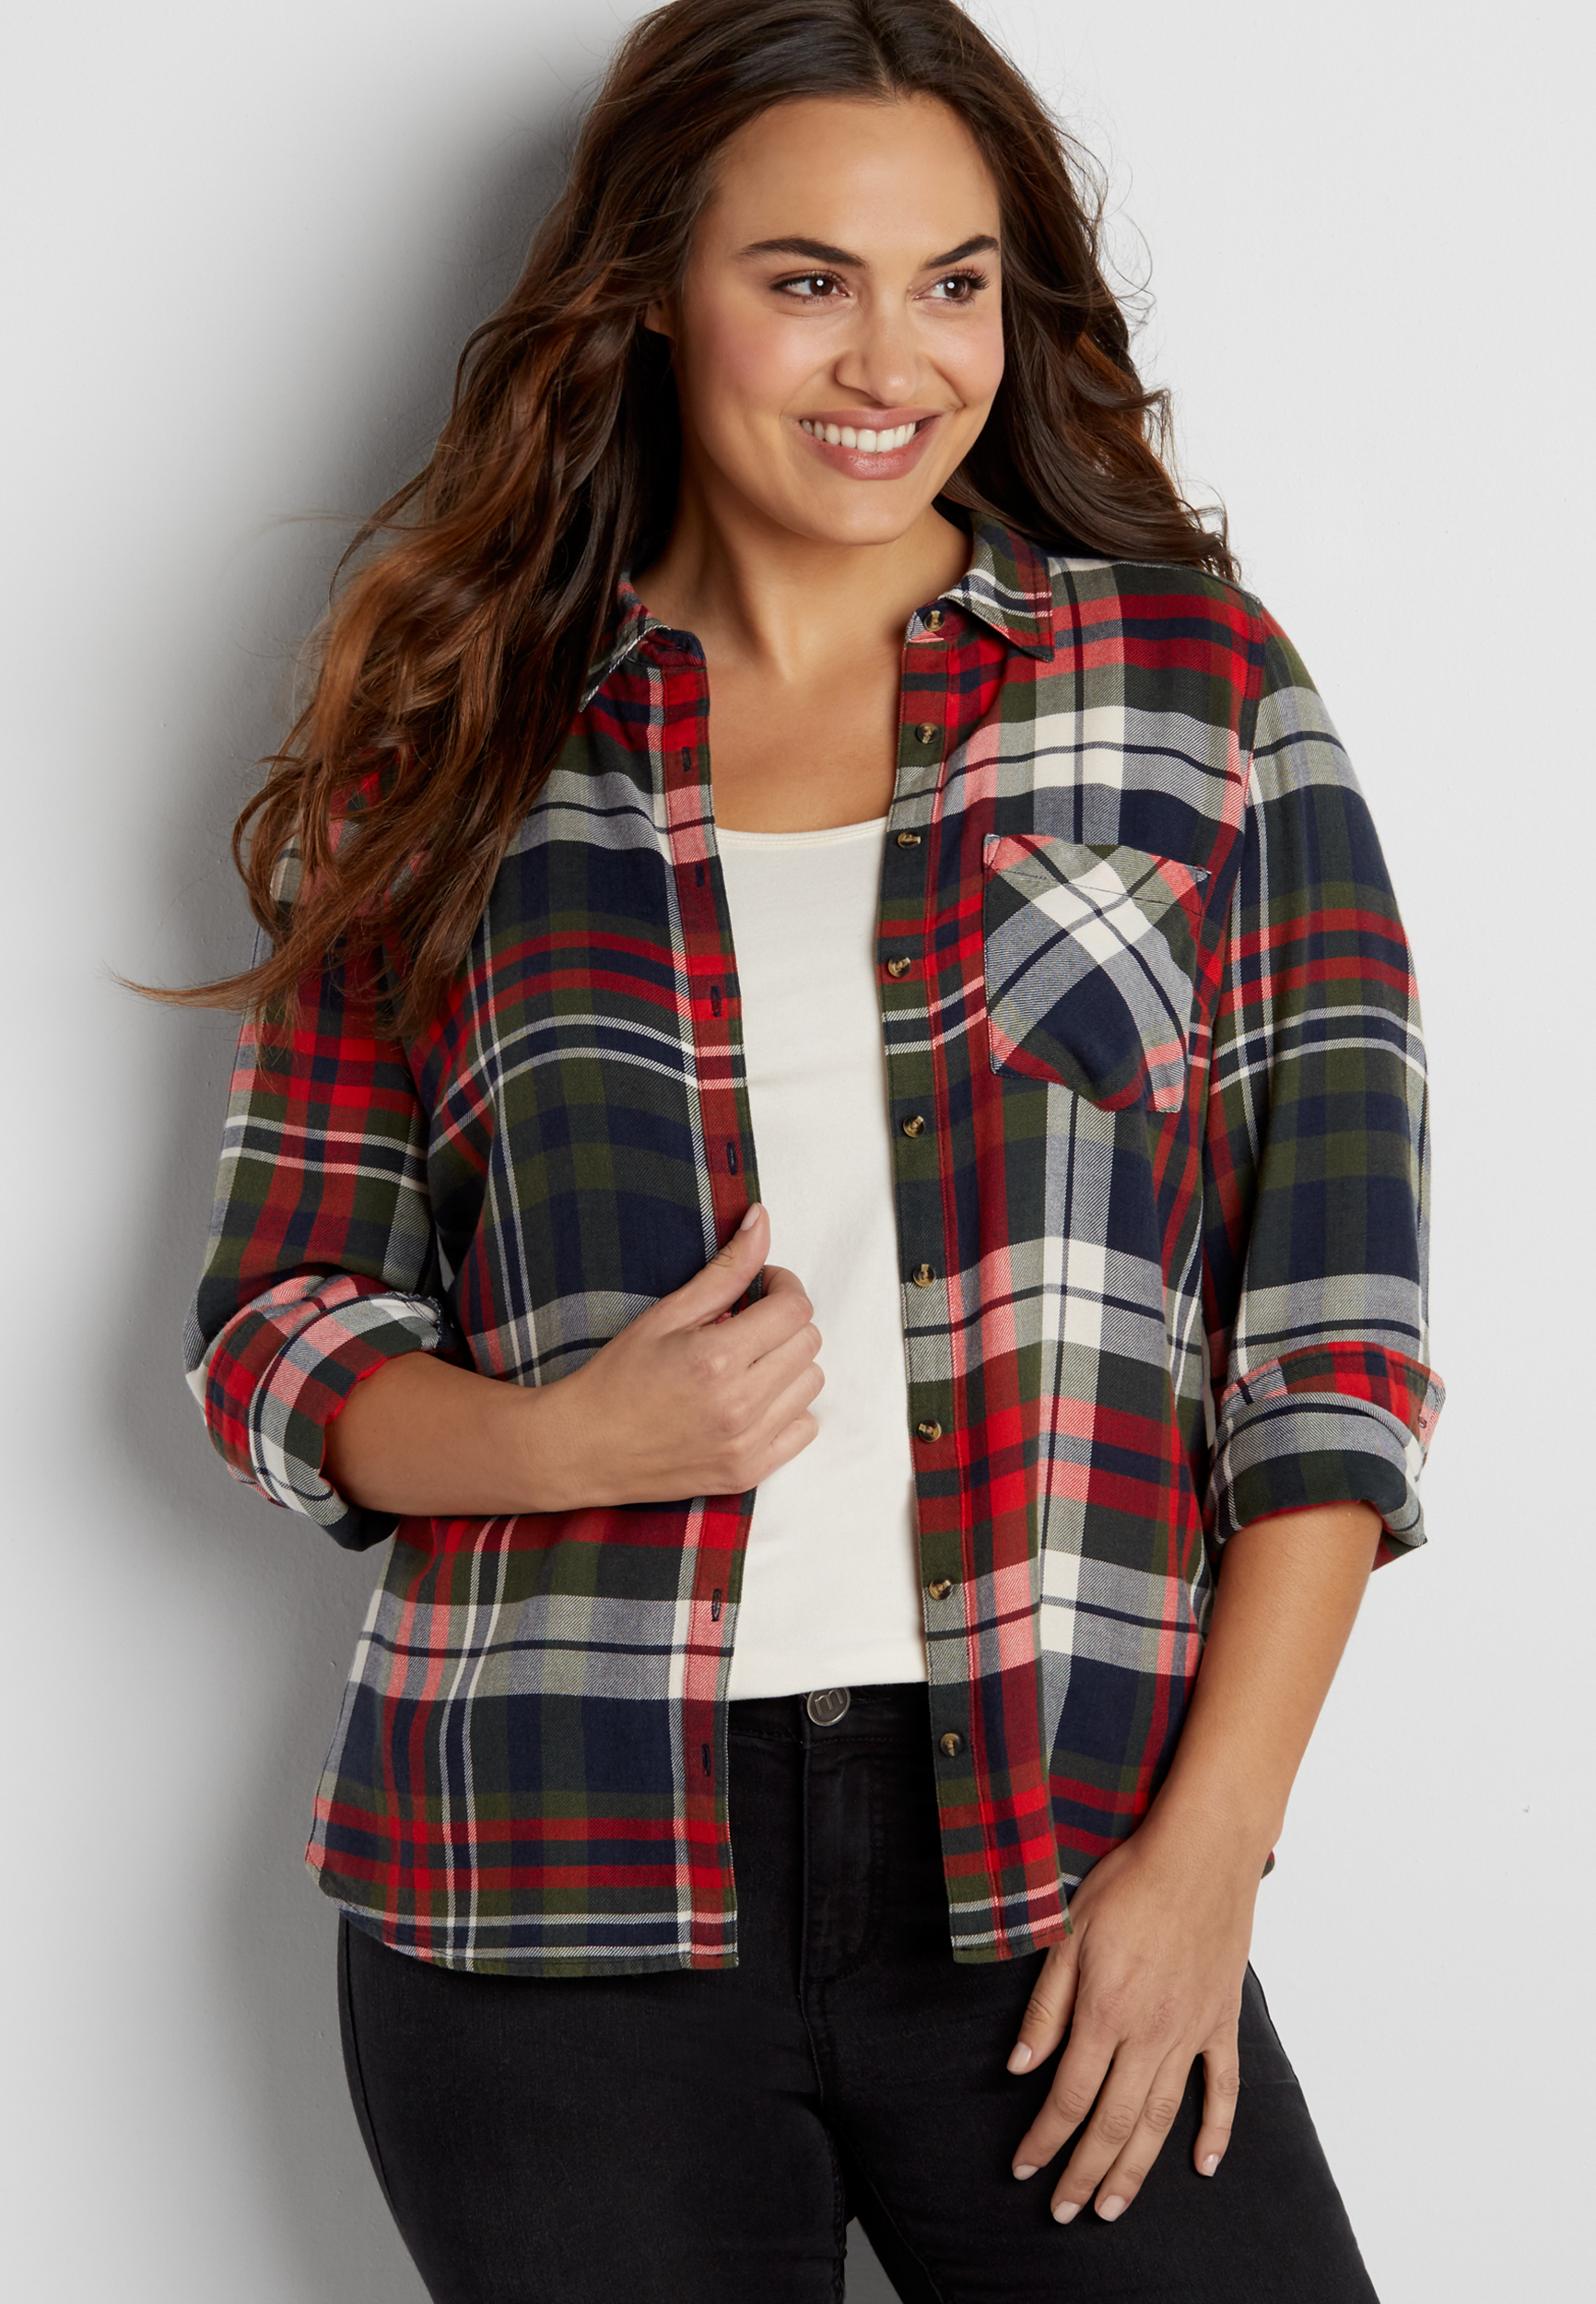 plus size button down plaid shirt in red, green, and navy blue plaid ...